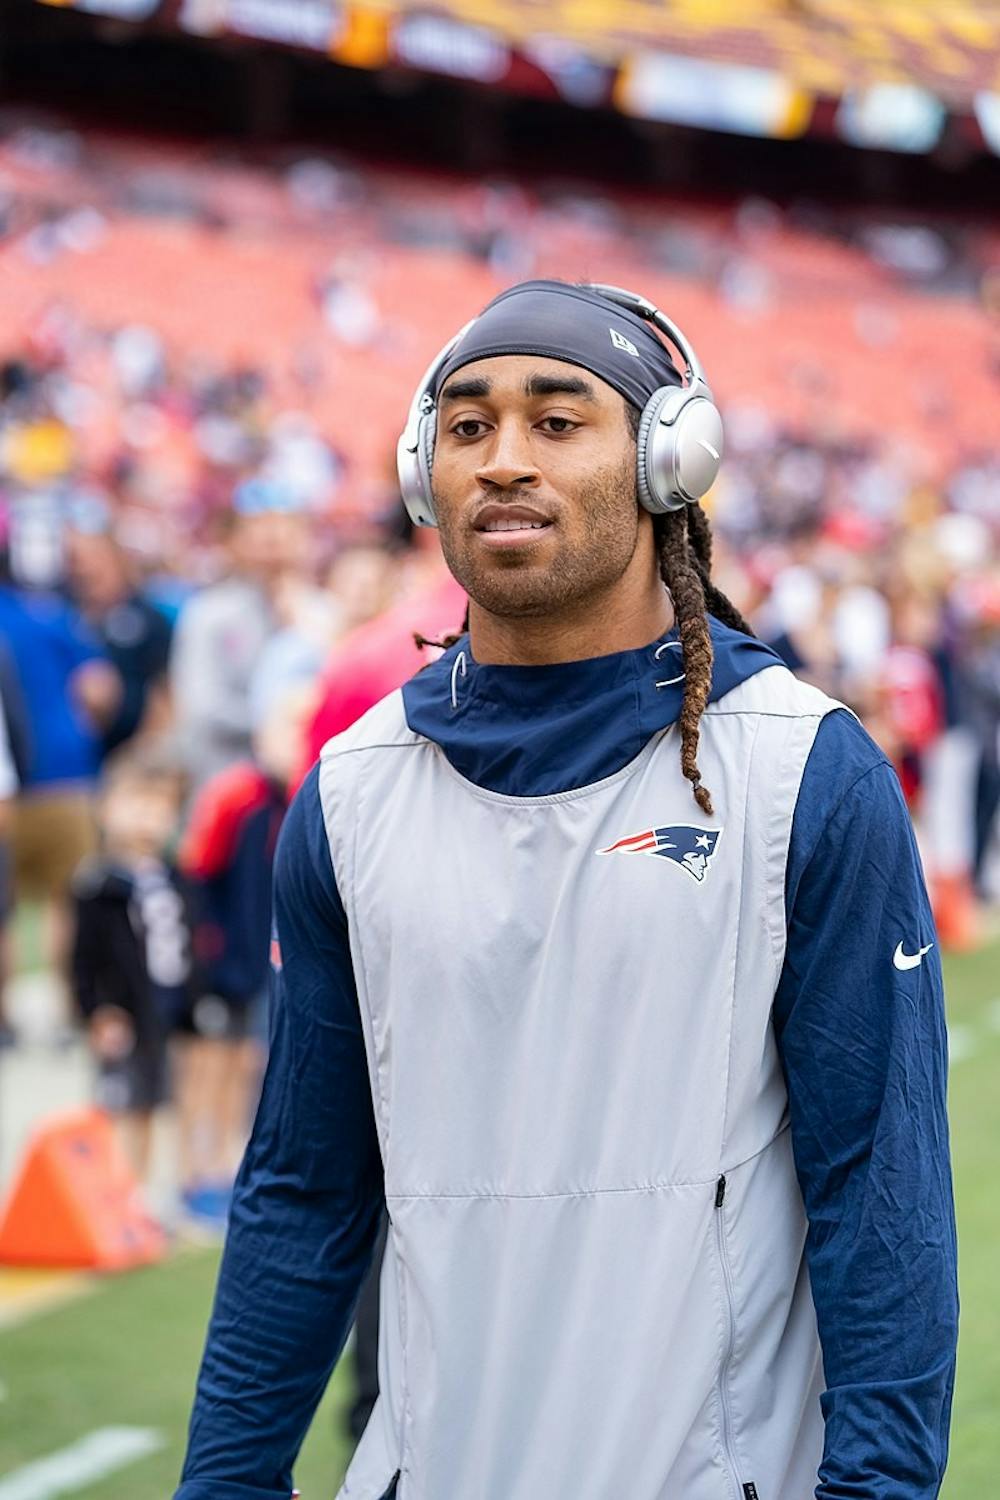 Patriots cornerback Stephon Gilmore is one of the NFL players who have tested positive for COVID-19